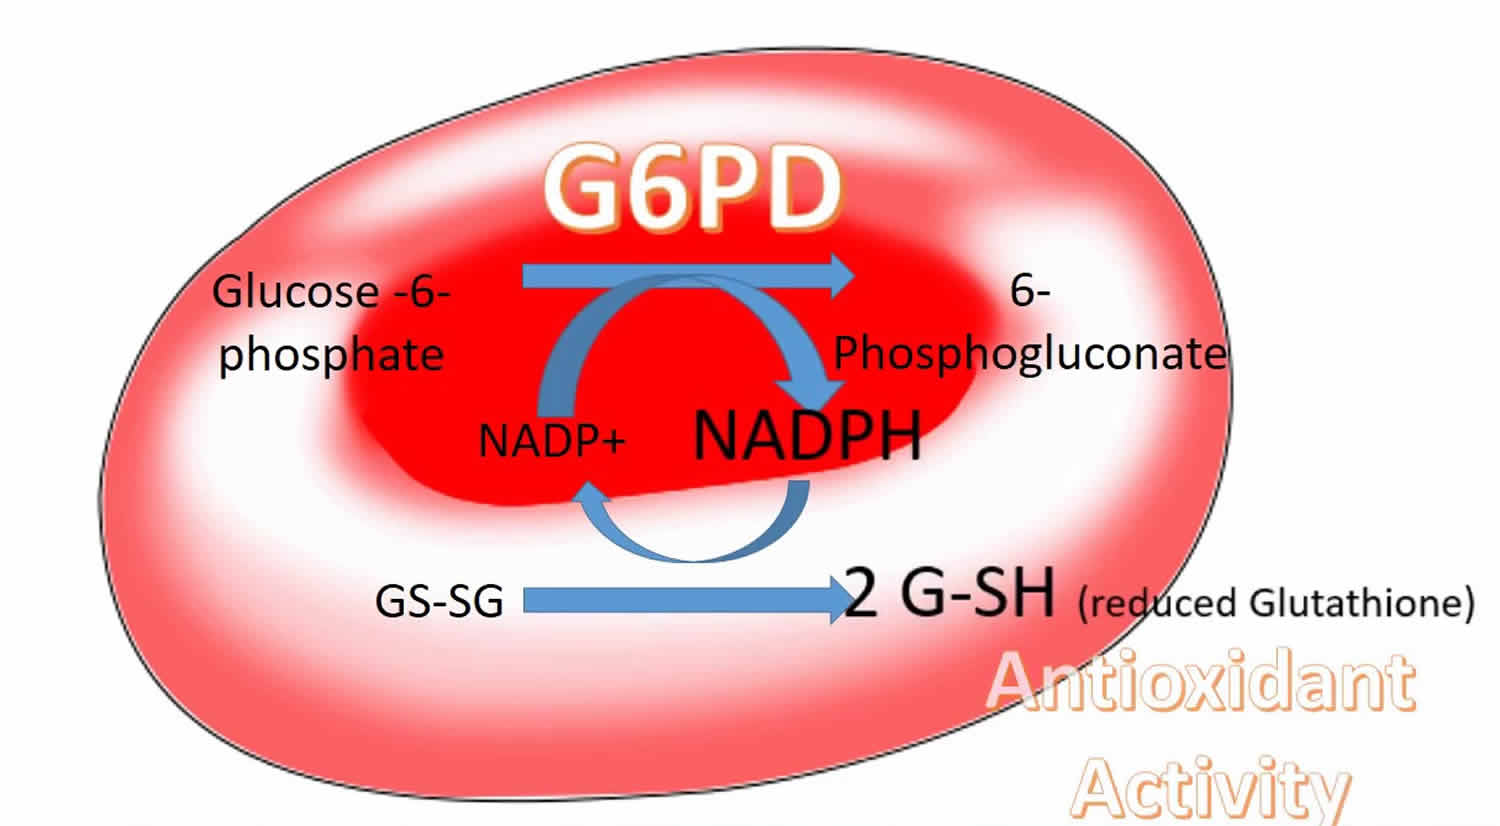 G6PD deficiency causes, symptoms, drugs to avoid & G6PD deficiency